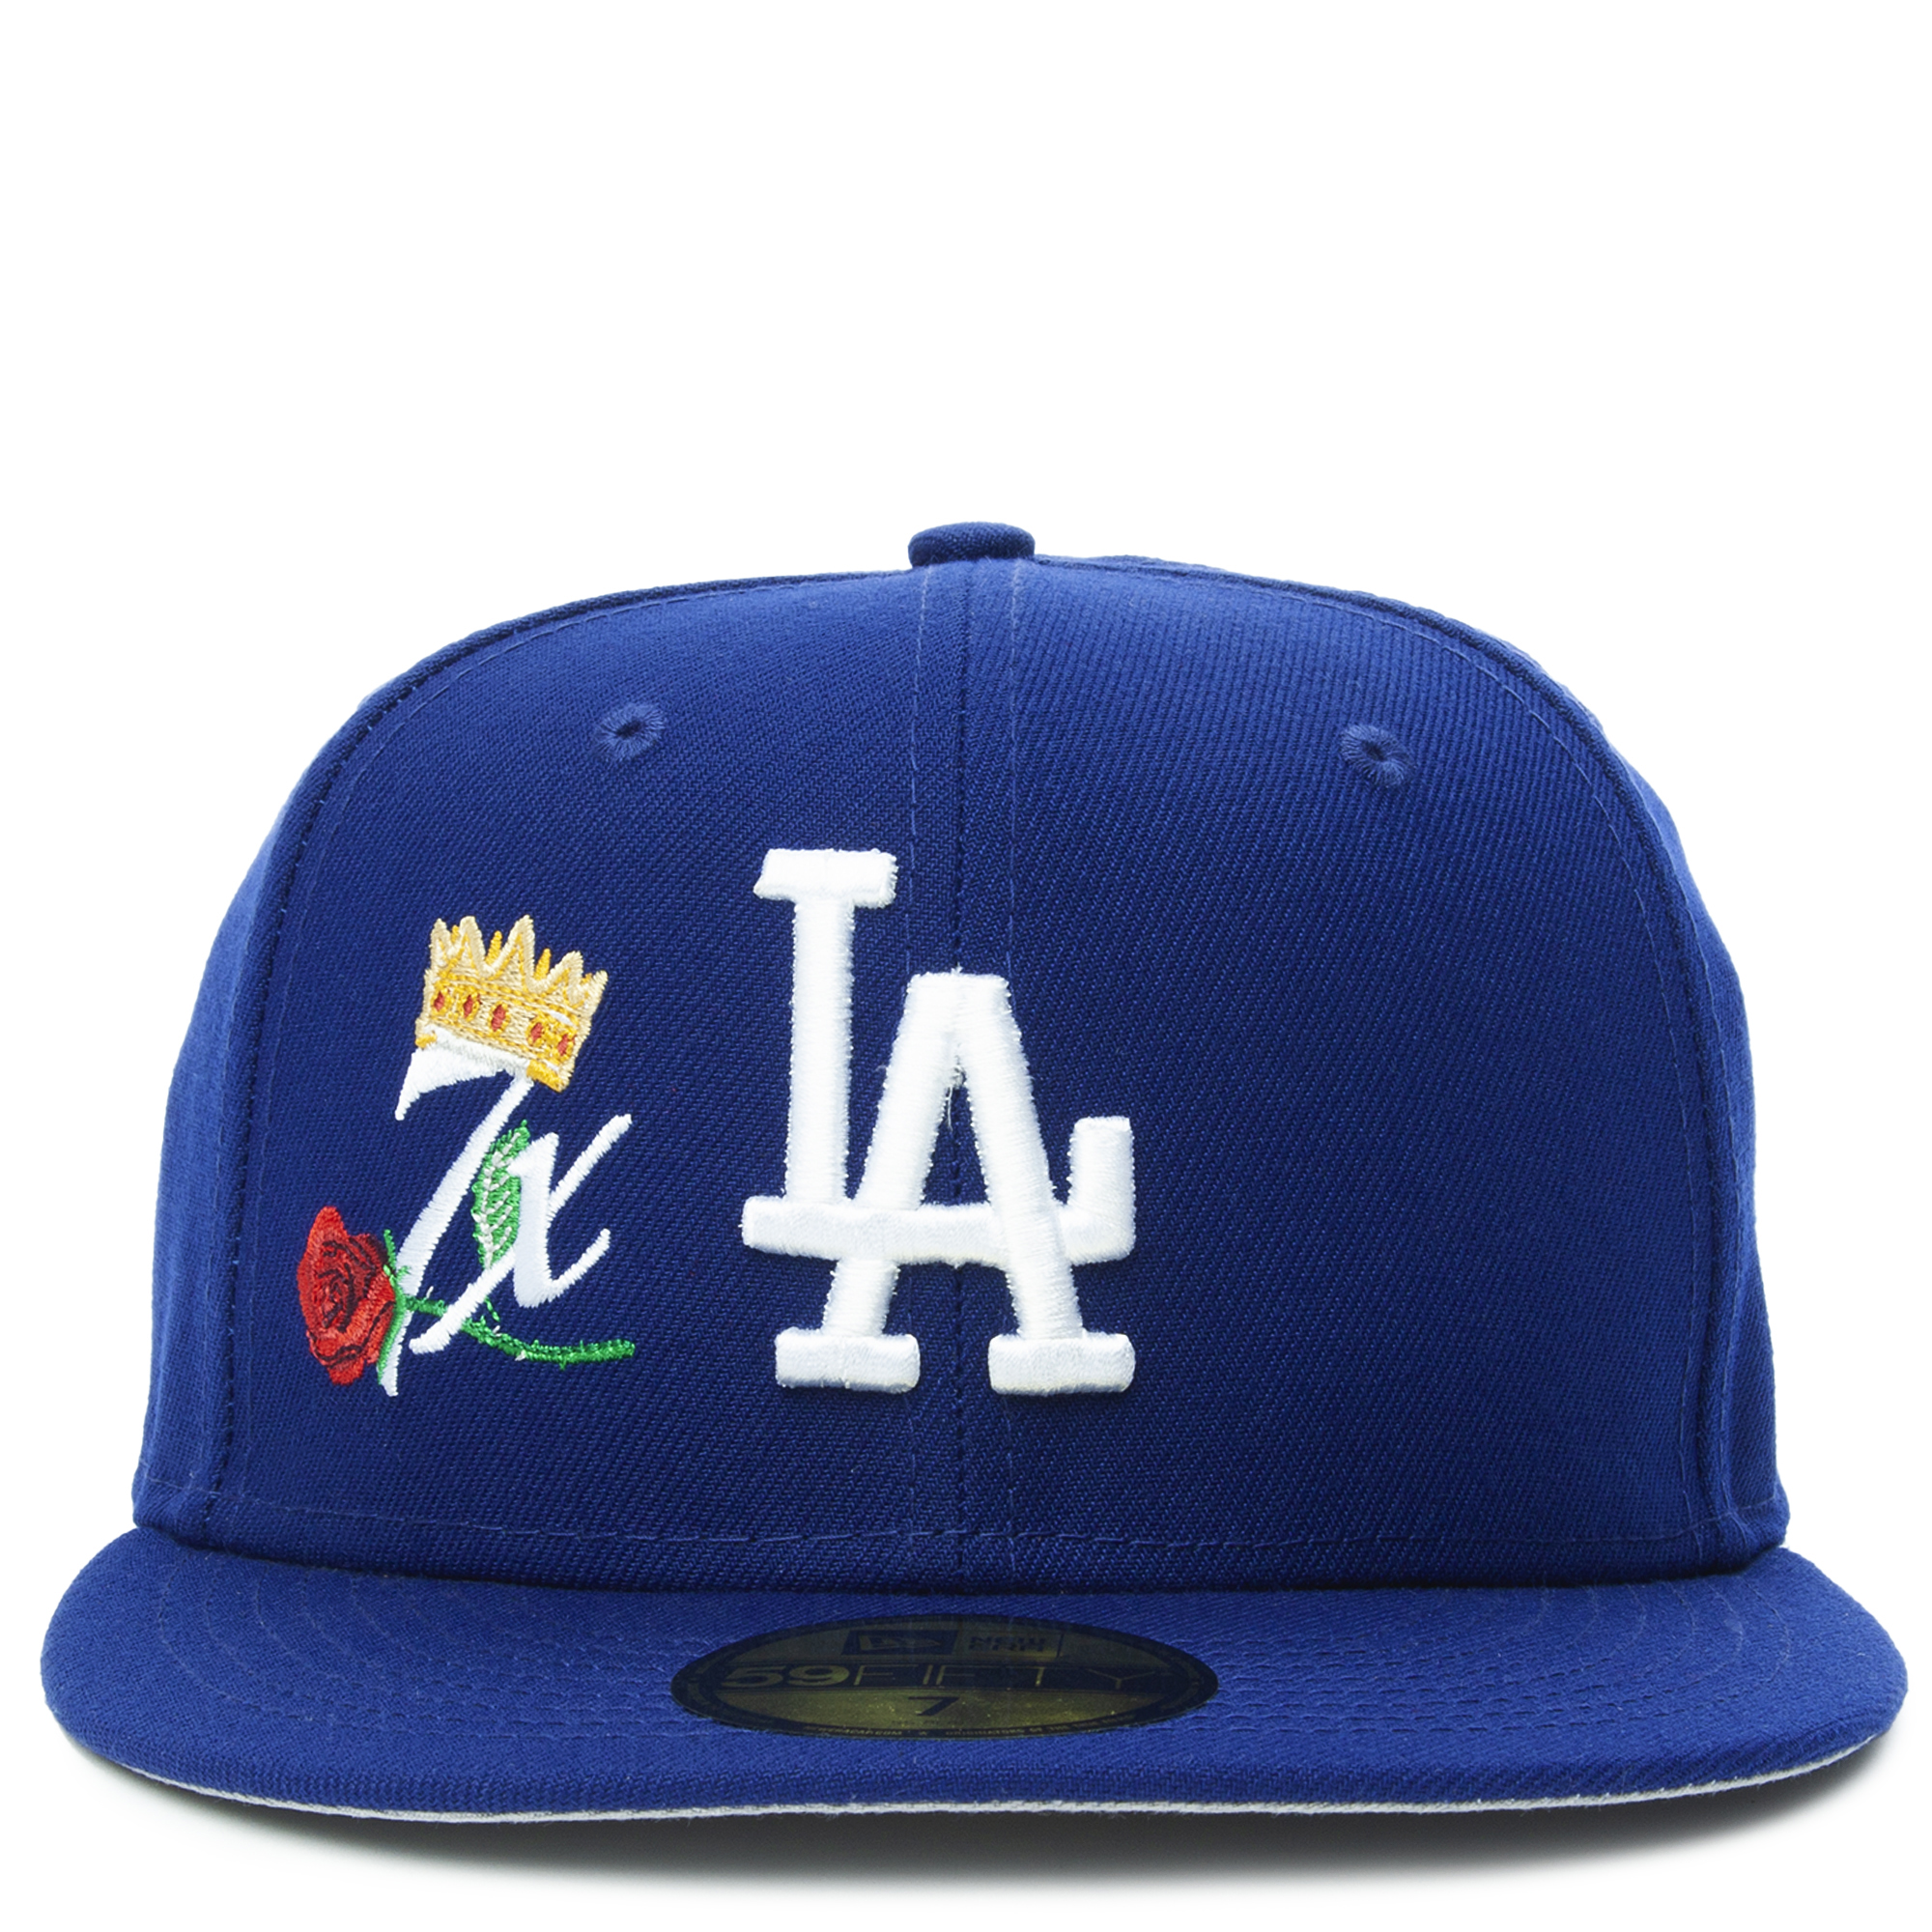 New Era Men's 59FIFTY? Authentic On-Field - Los Angeles Dodgers Youth